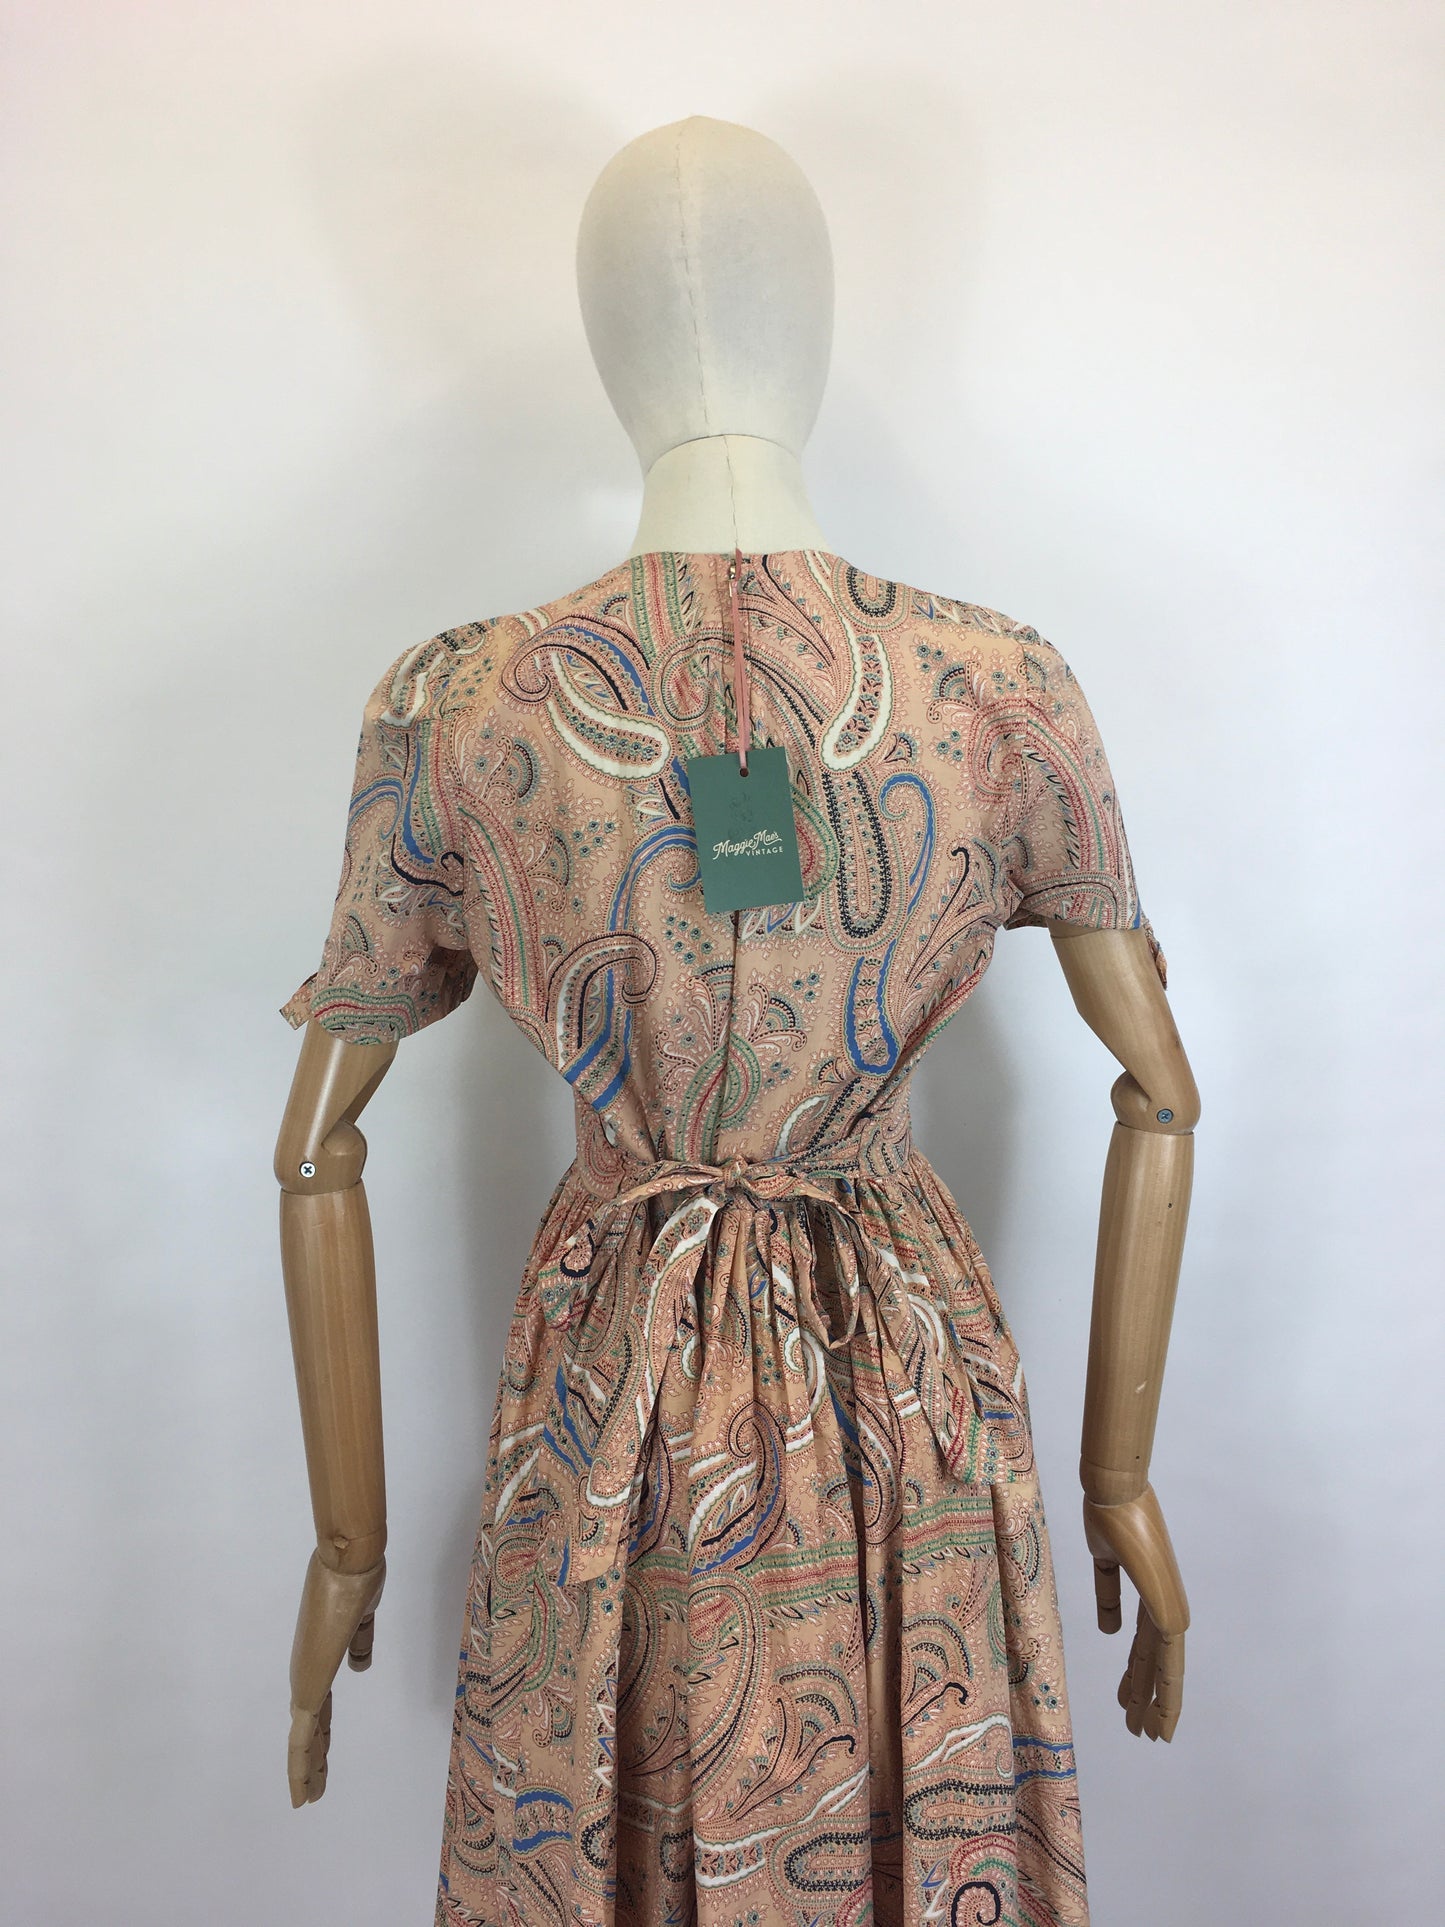 Original 1940’s Darling Day Dress - In A Very Pretty Paisley Print Cotton